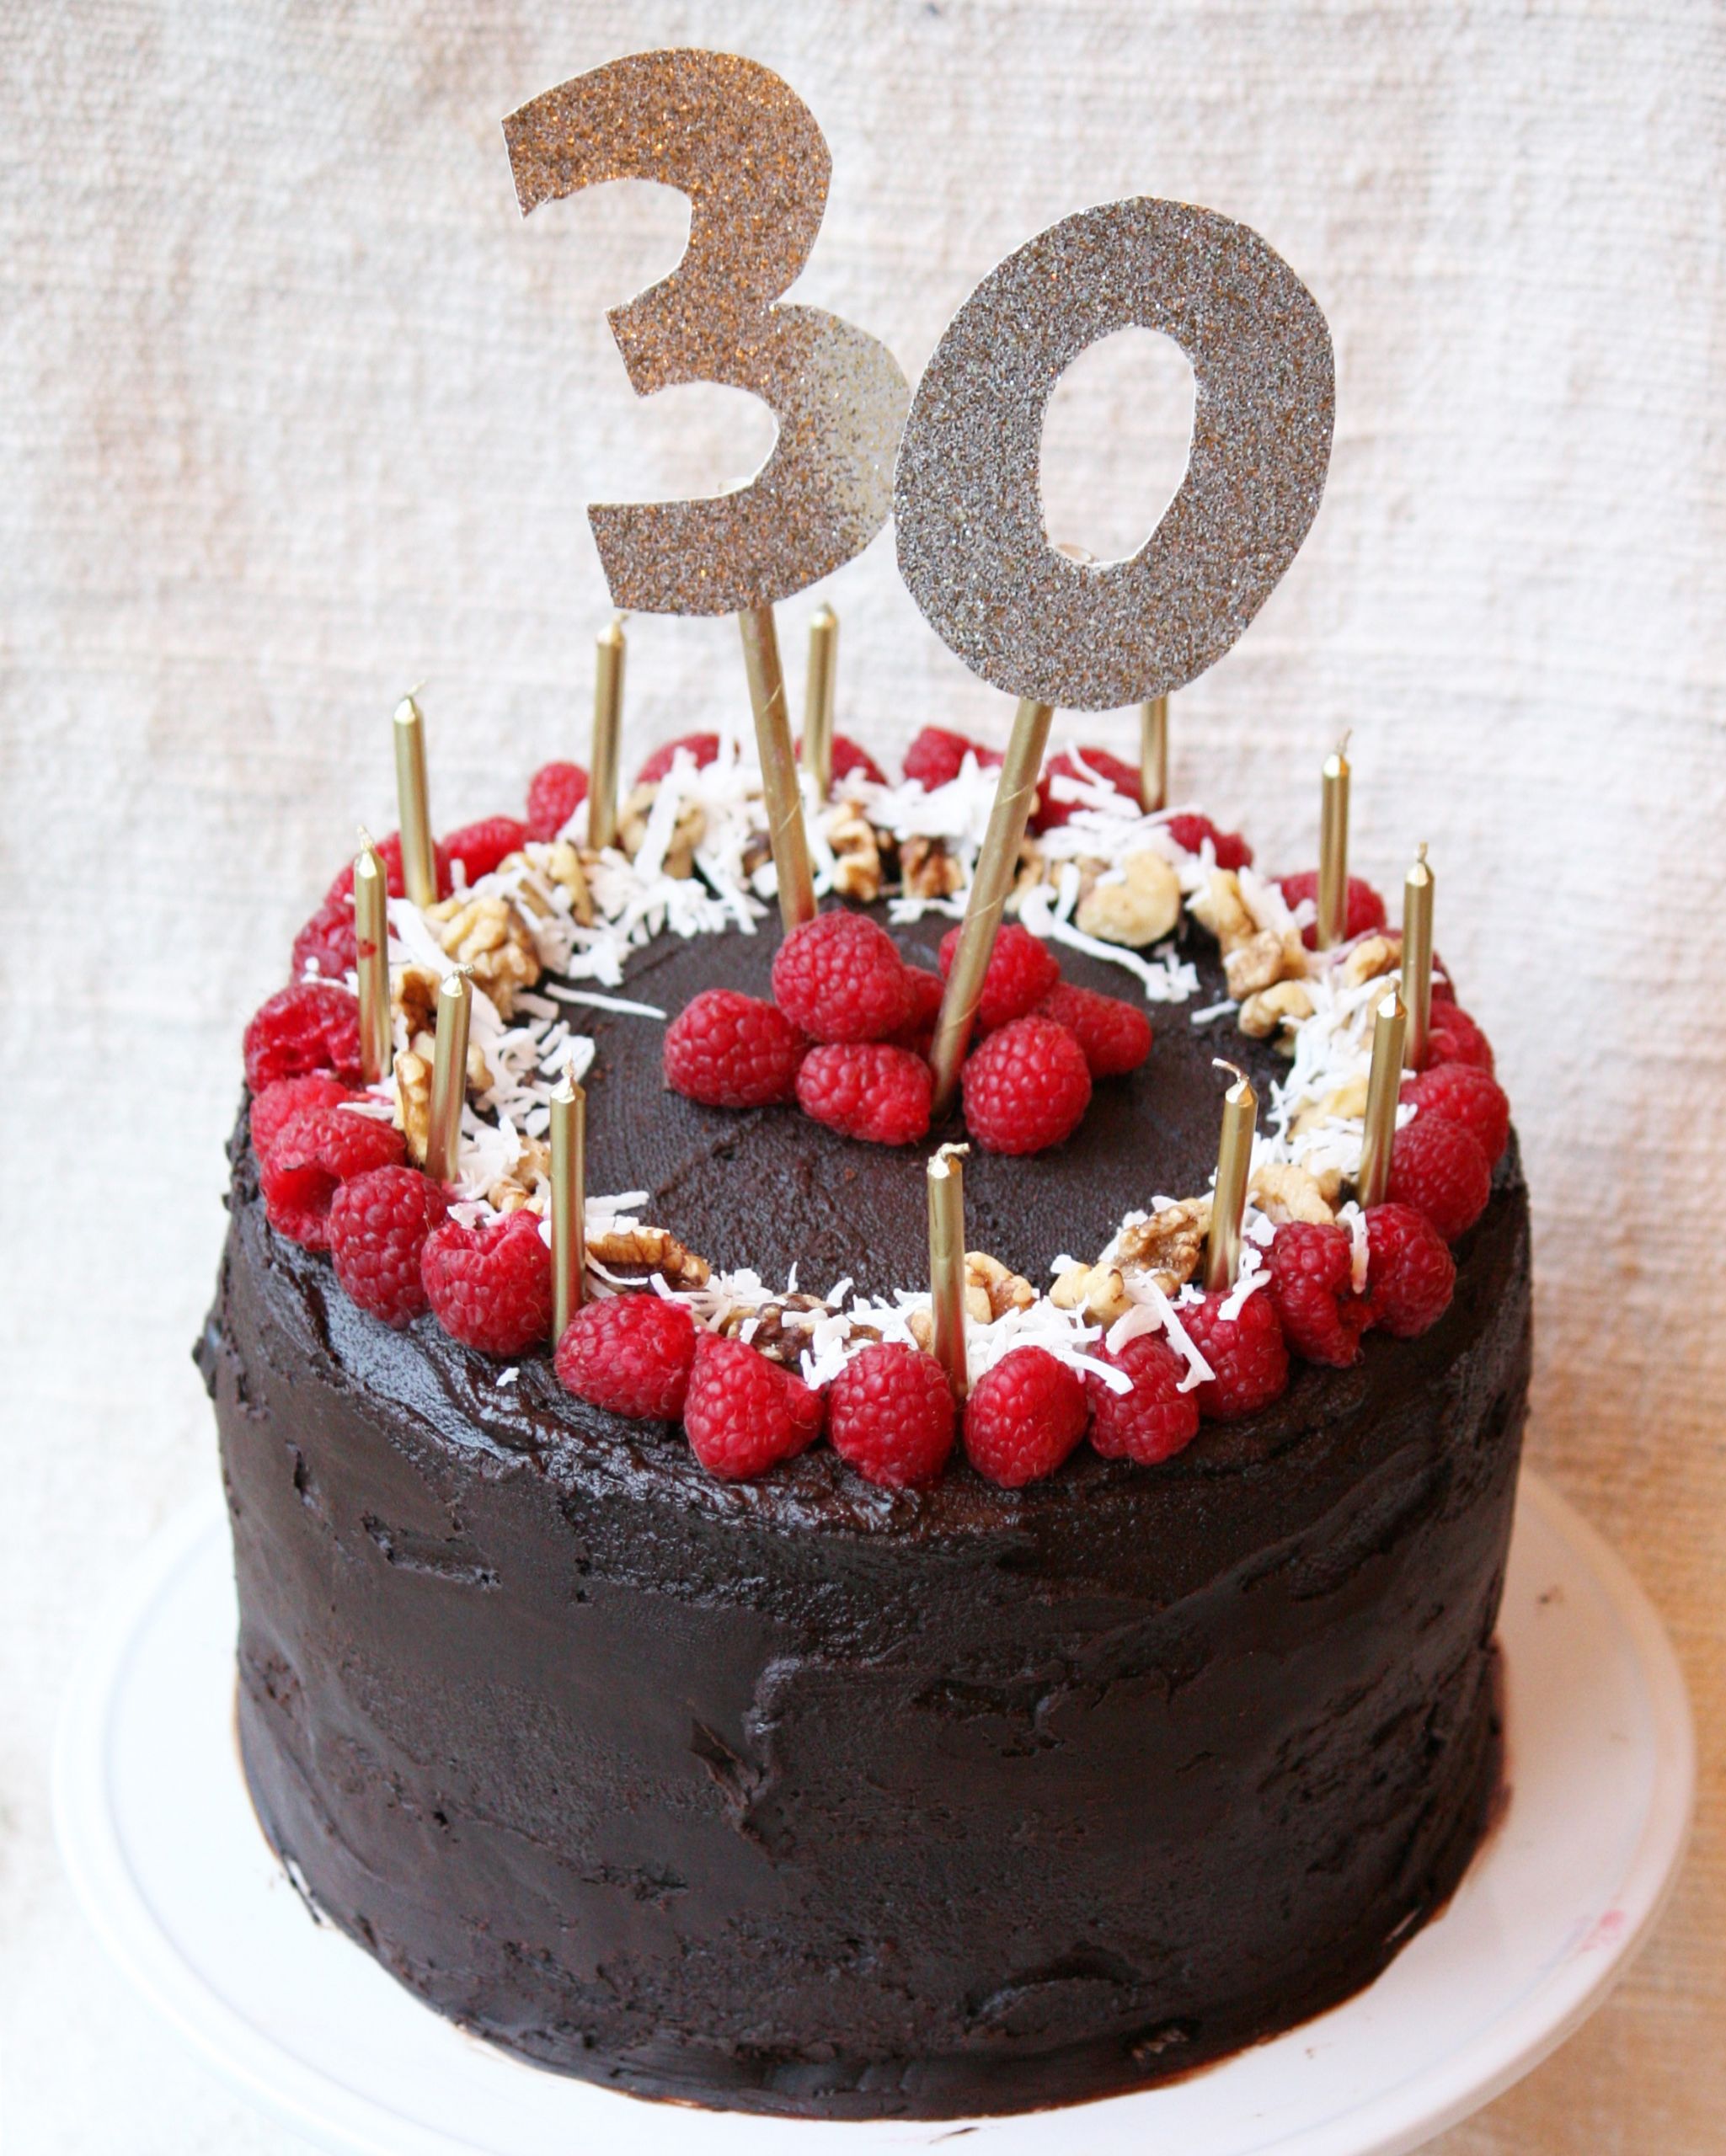 30th Birthday Cake Ideas
 The top 20 Ideas About 30th Birthday Cake Home